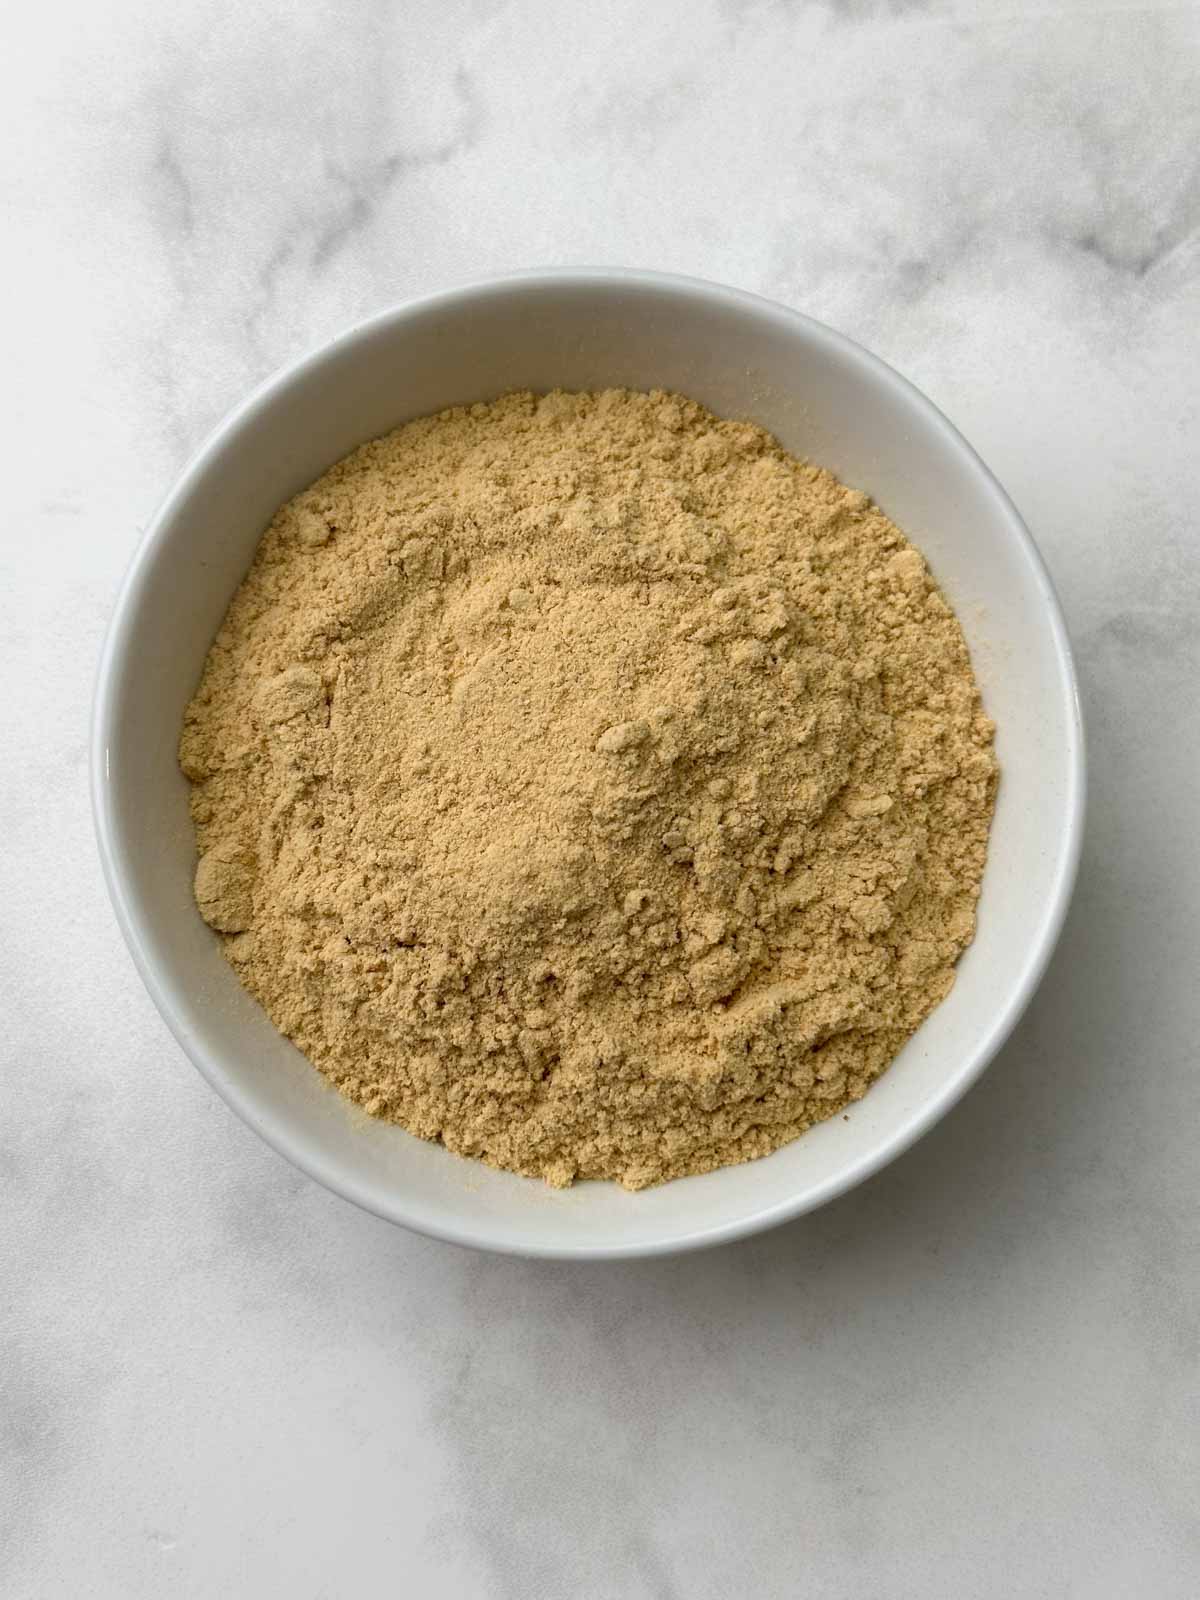 Dry Ginger Powder in a bowl